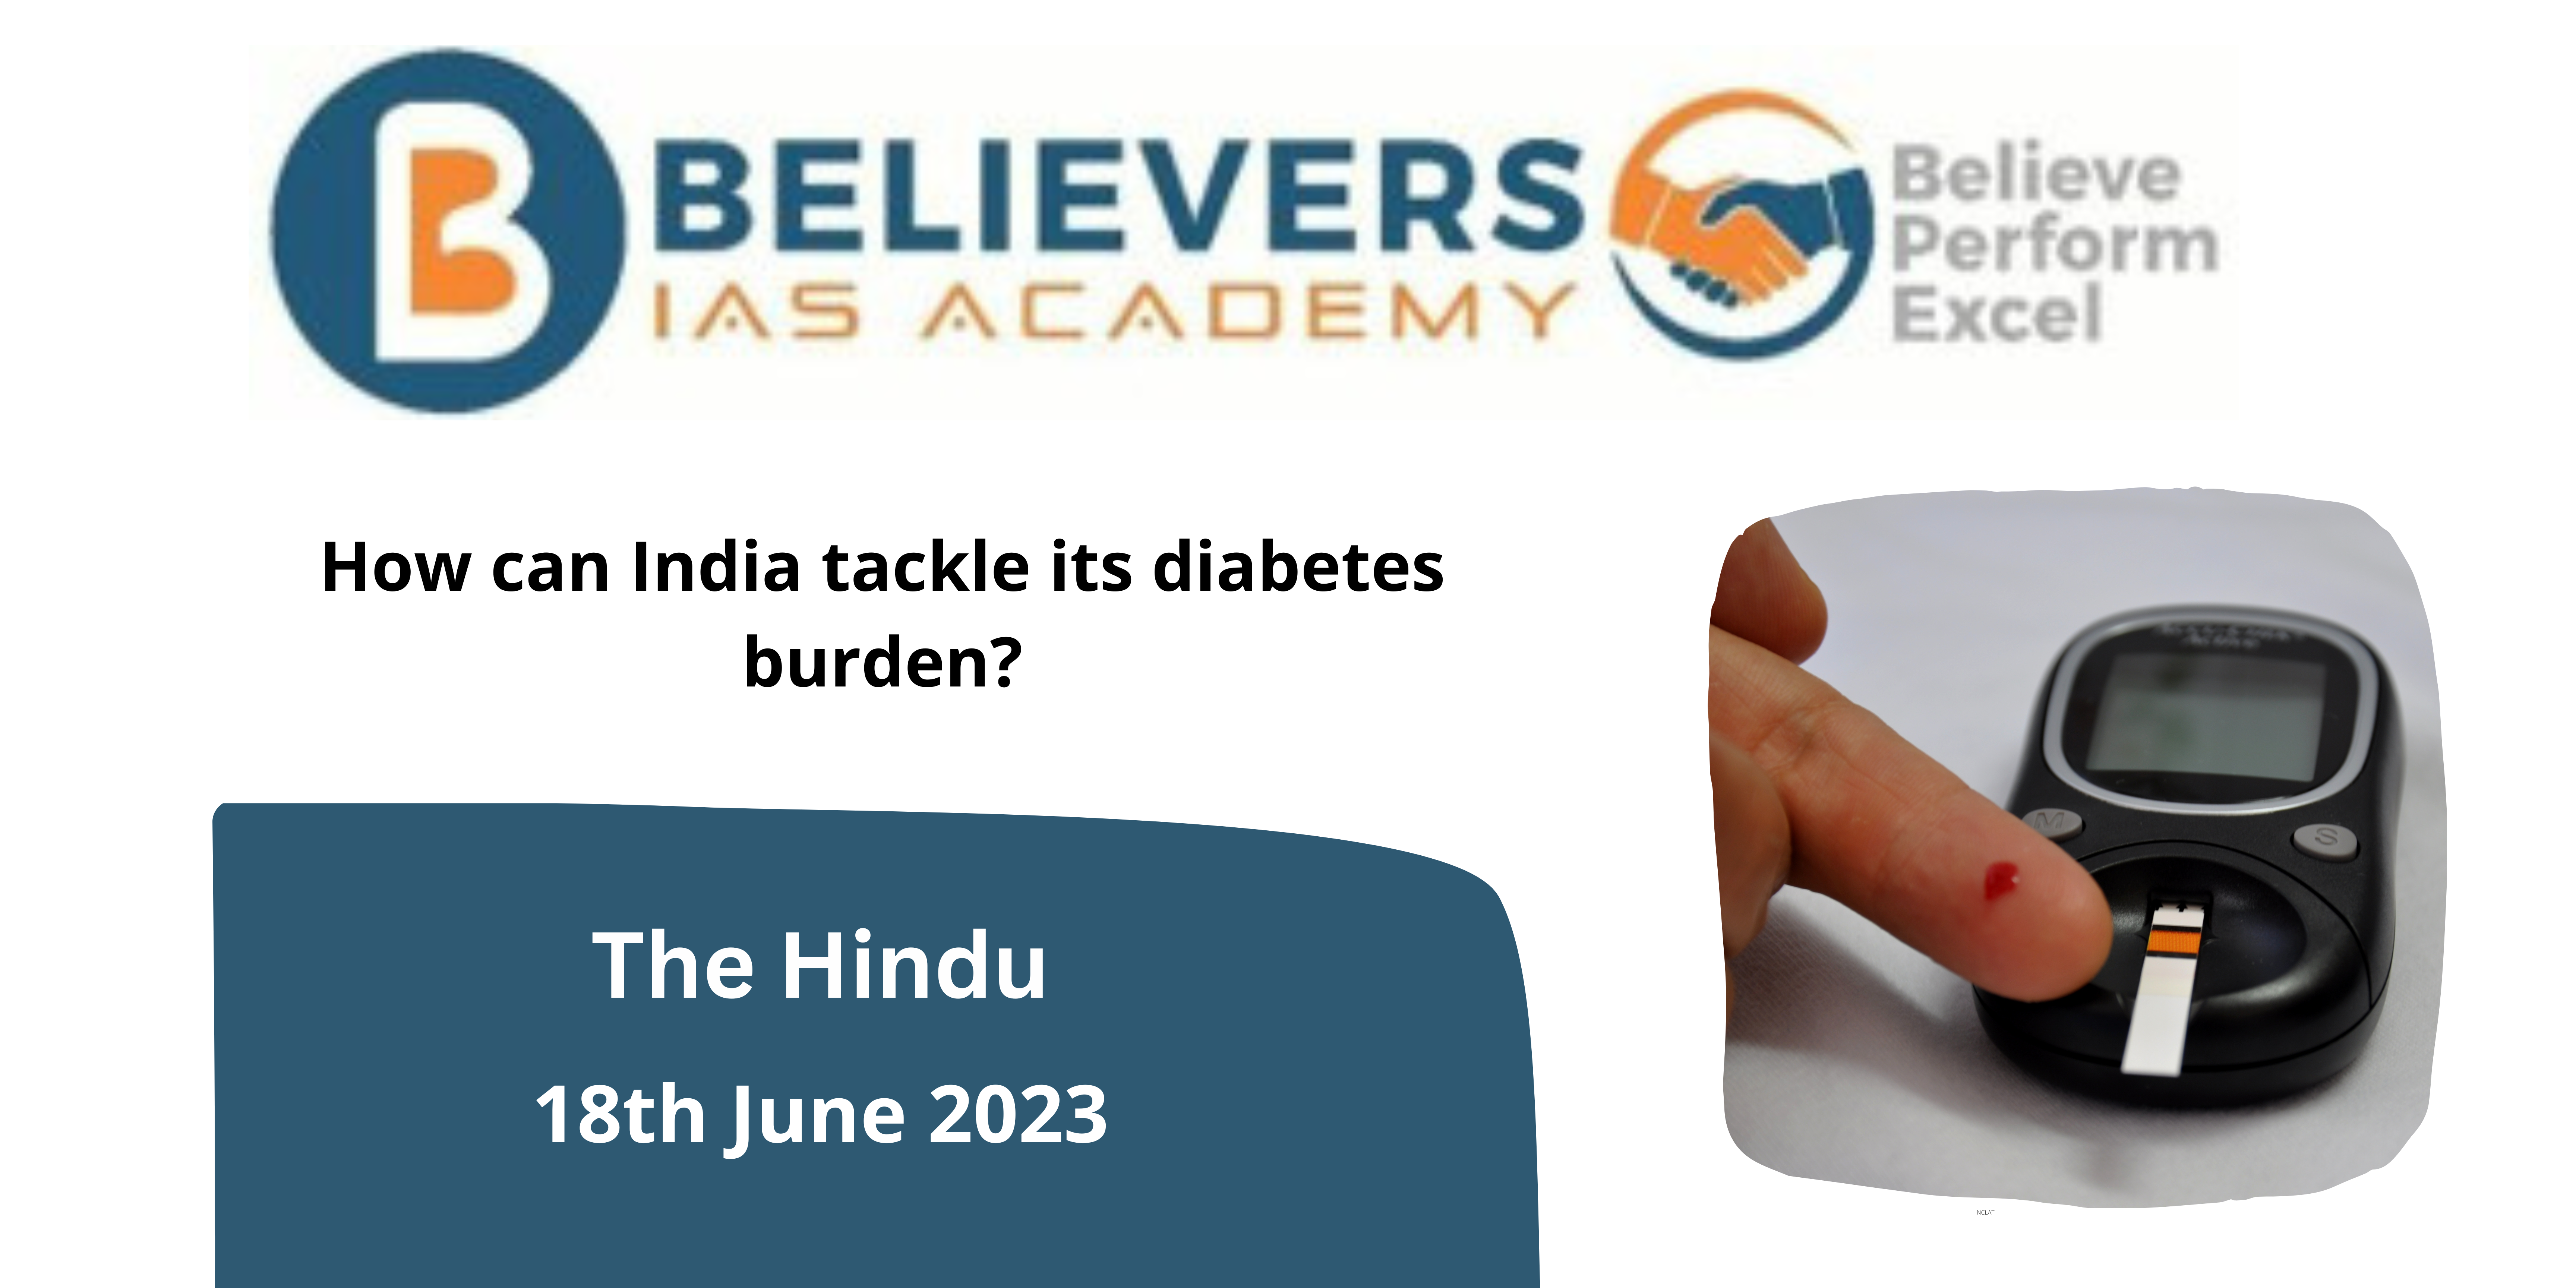 How can India tackle its diabetes burden?